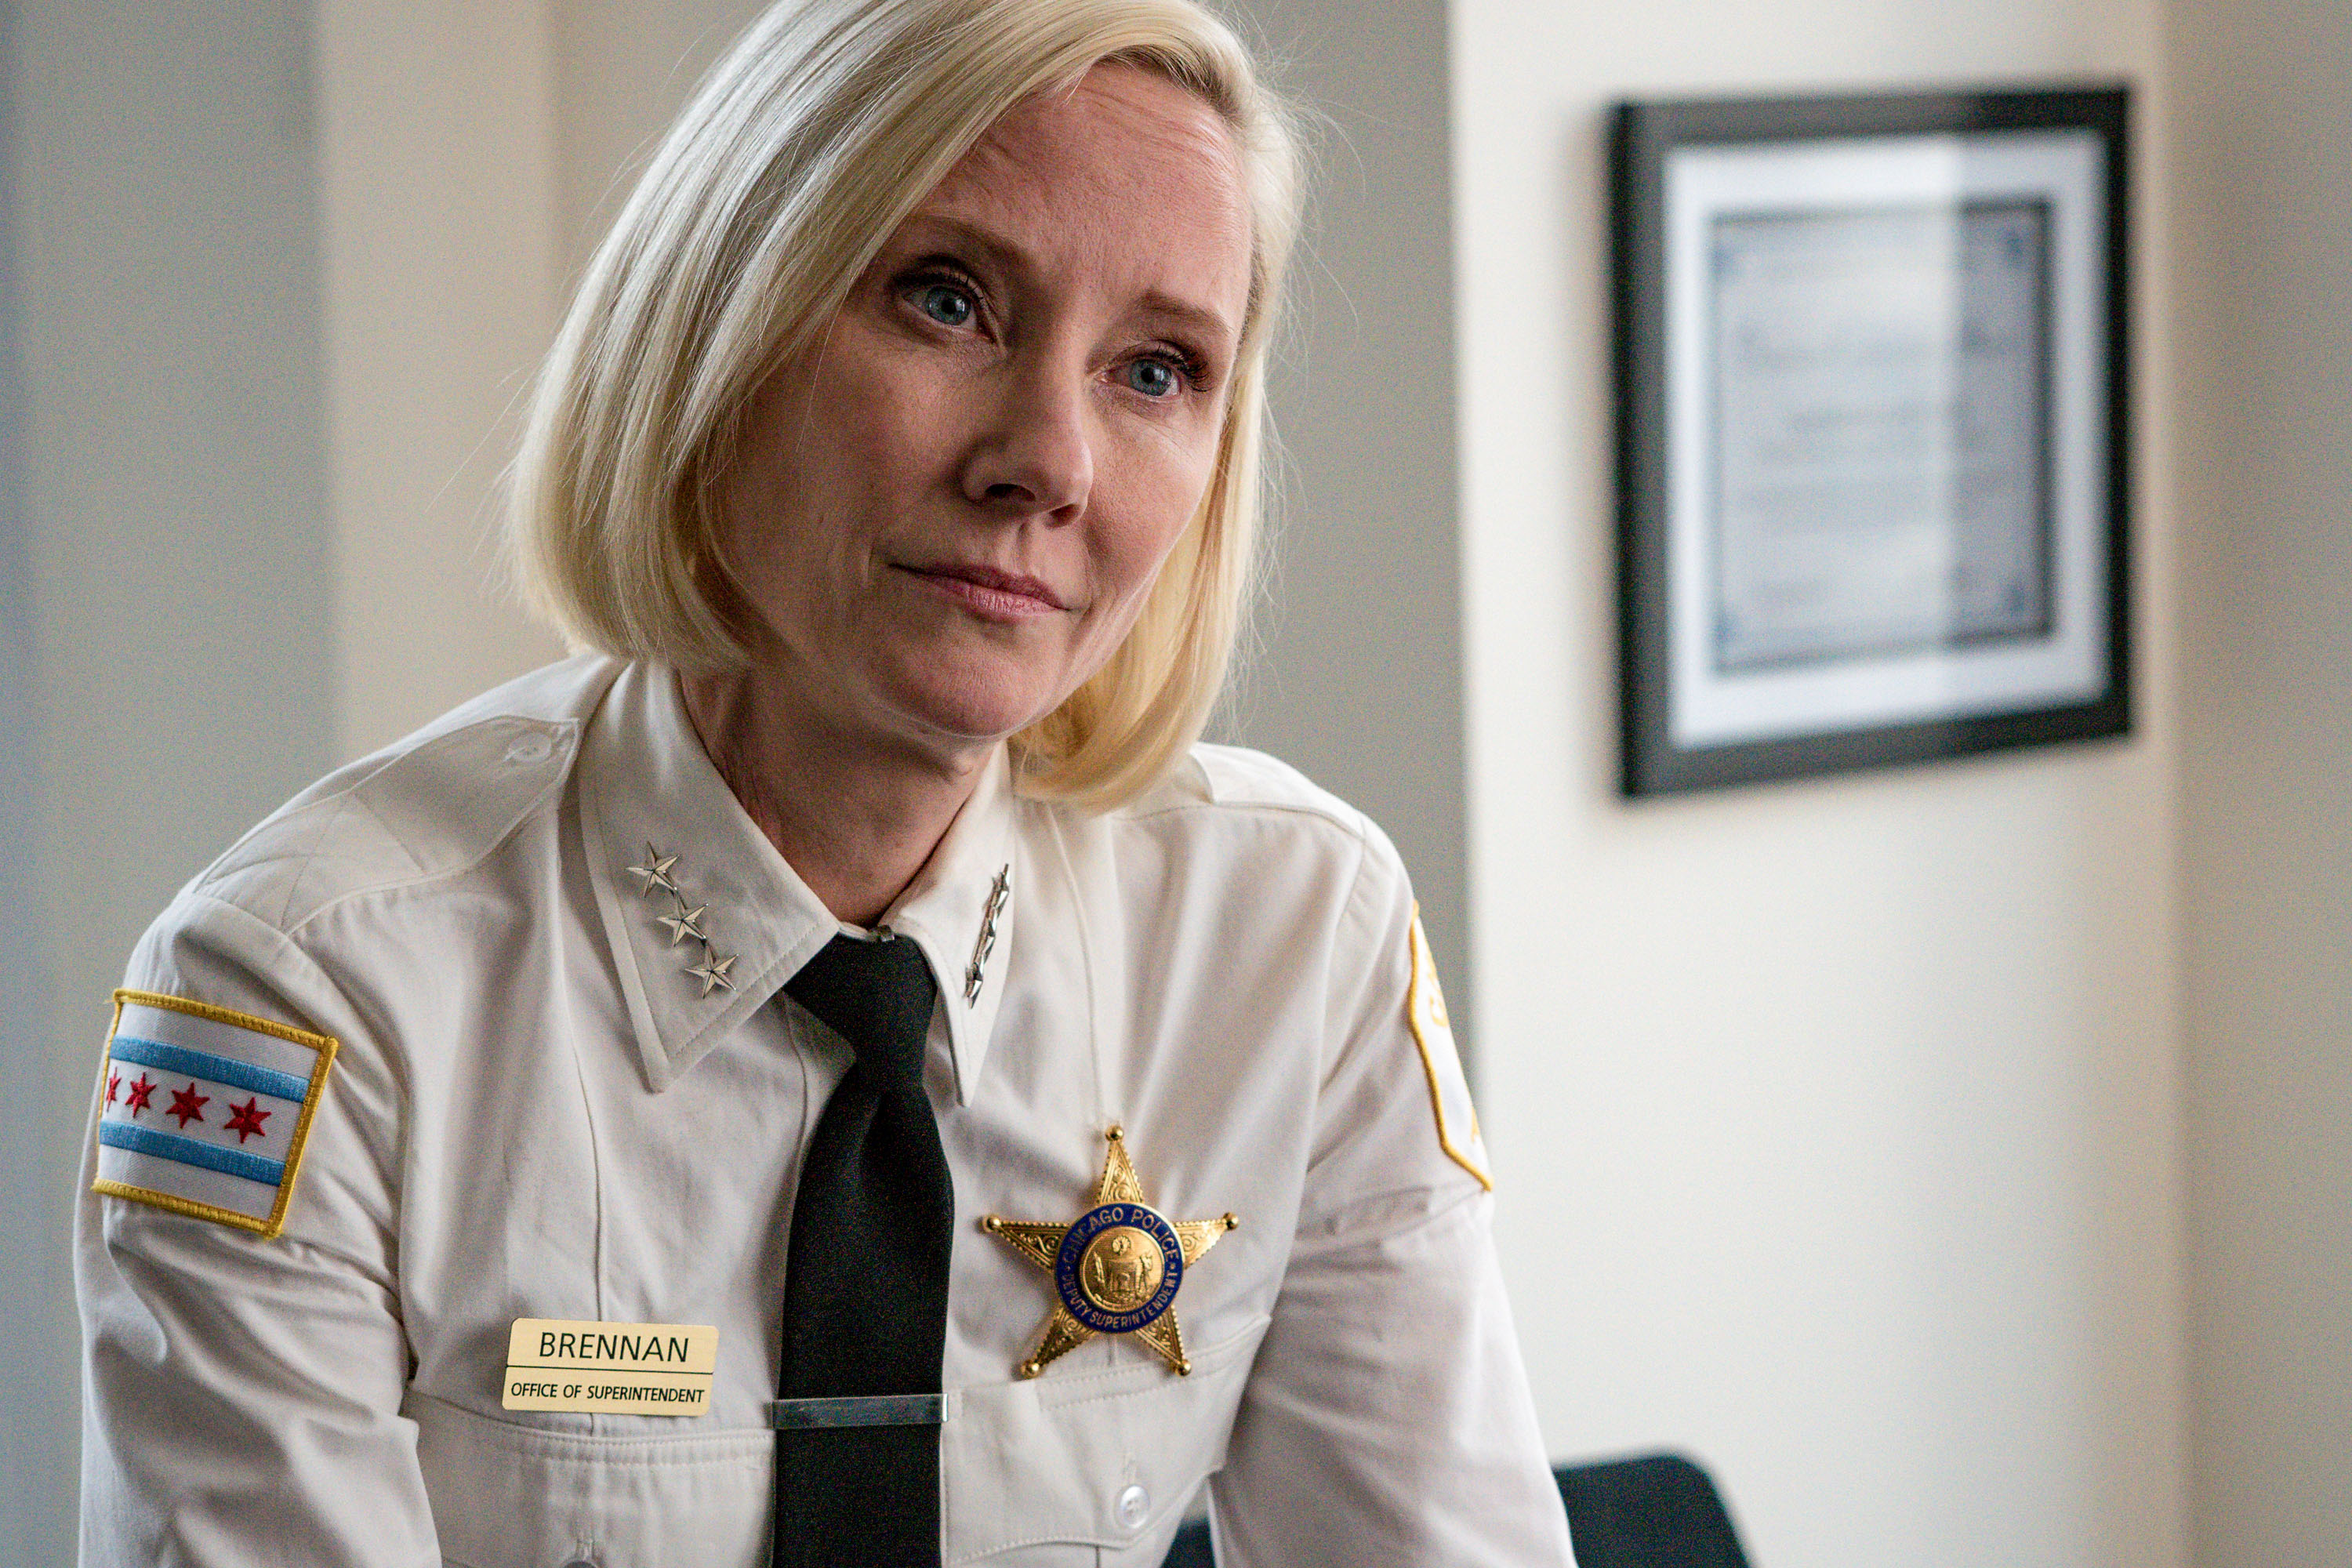 Anne Heche as Katherine Brennan on "Chicago P.D." season 6 circa 2018. | Source: Getty Images